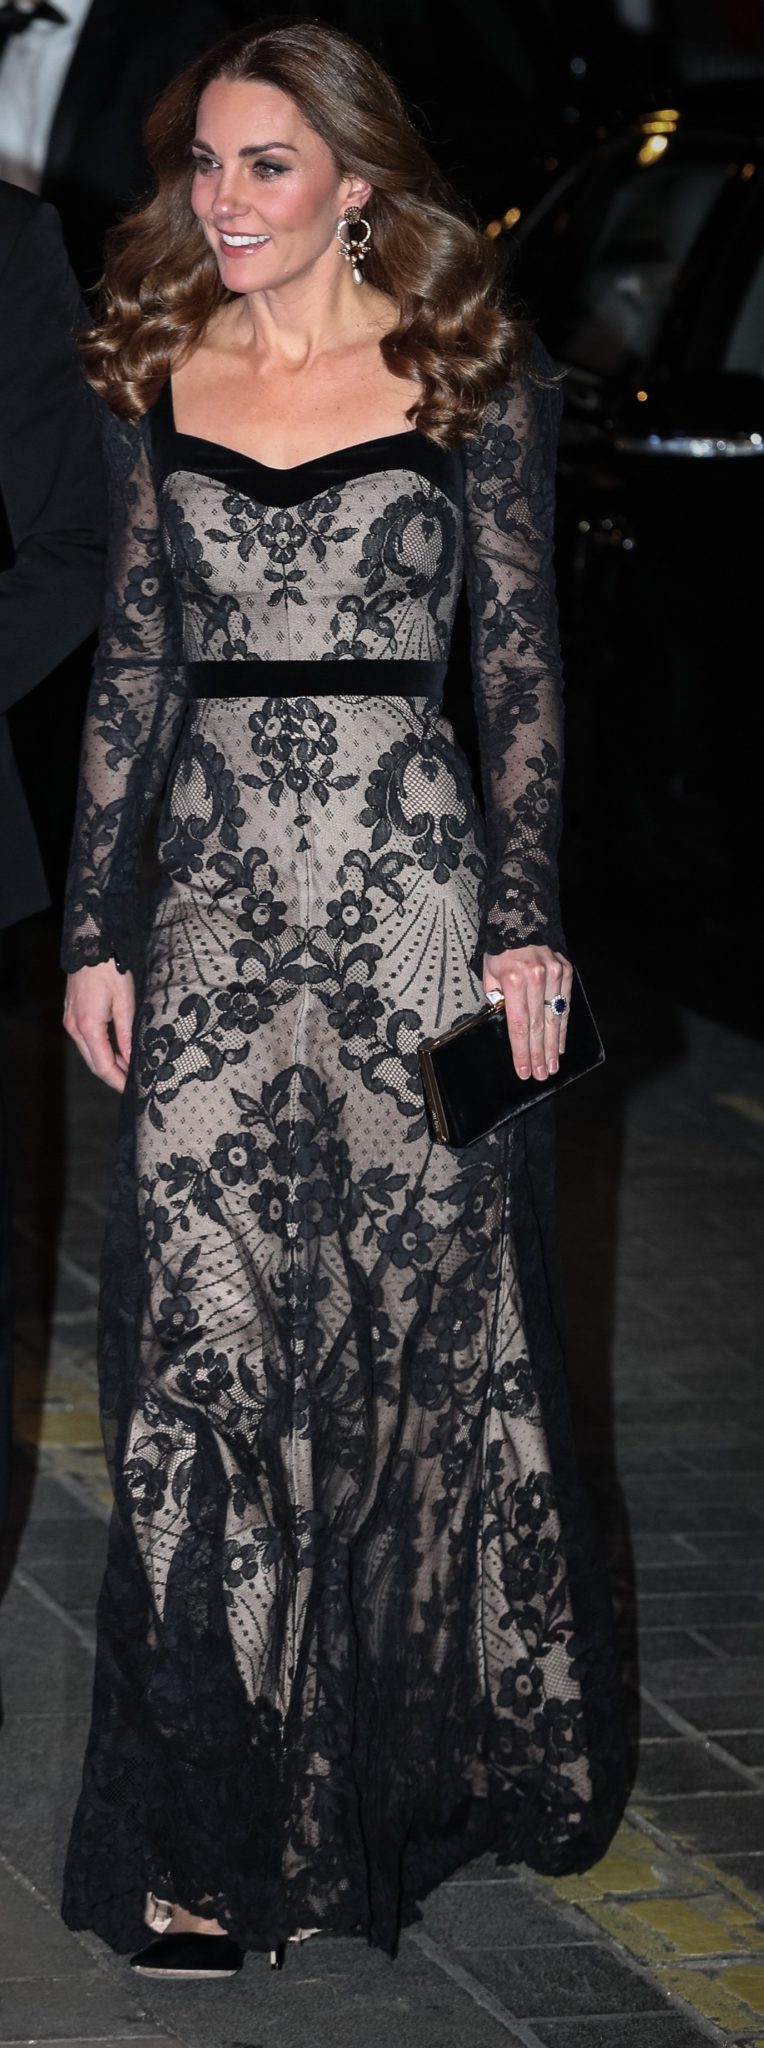 The dazzling Duchess of Cambridge wore black lace Alexander McQueen gown at the Royal Variety Performance in 2019